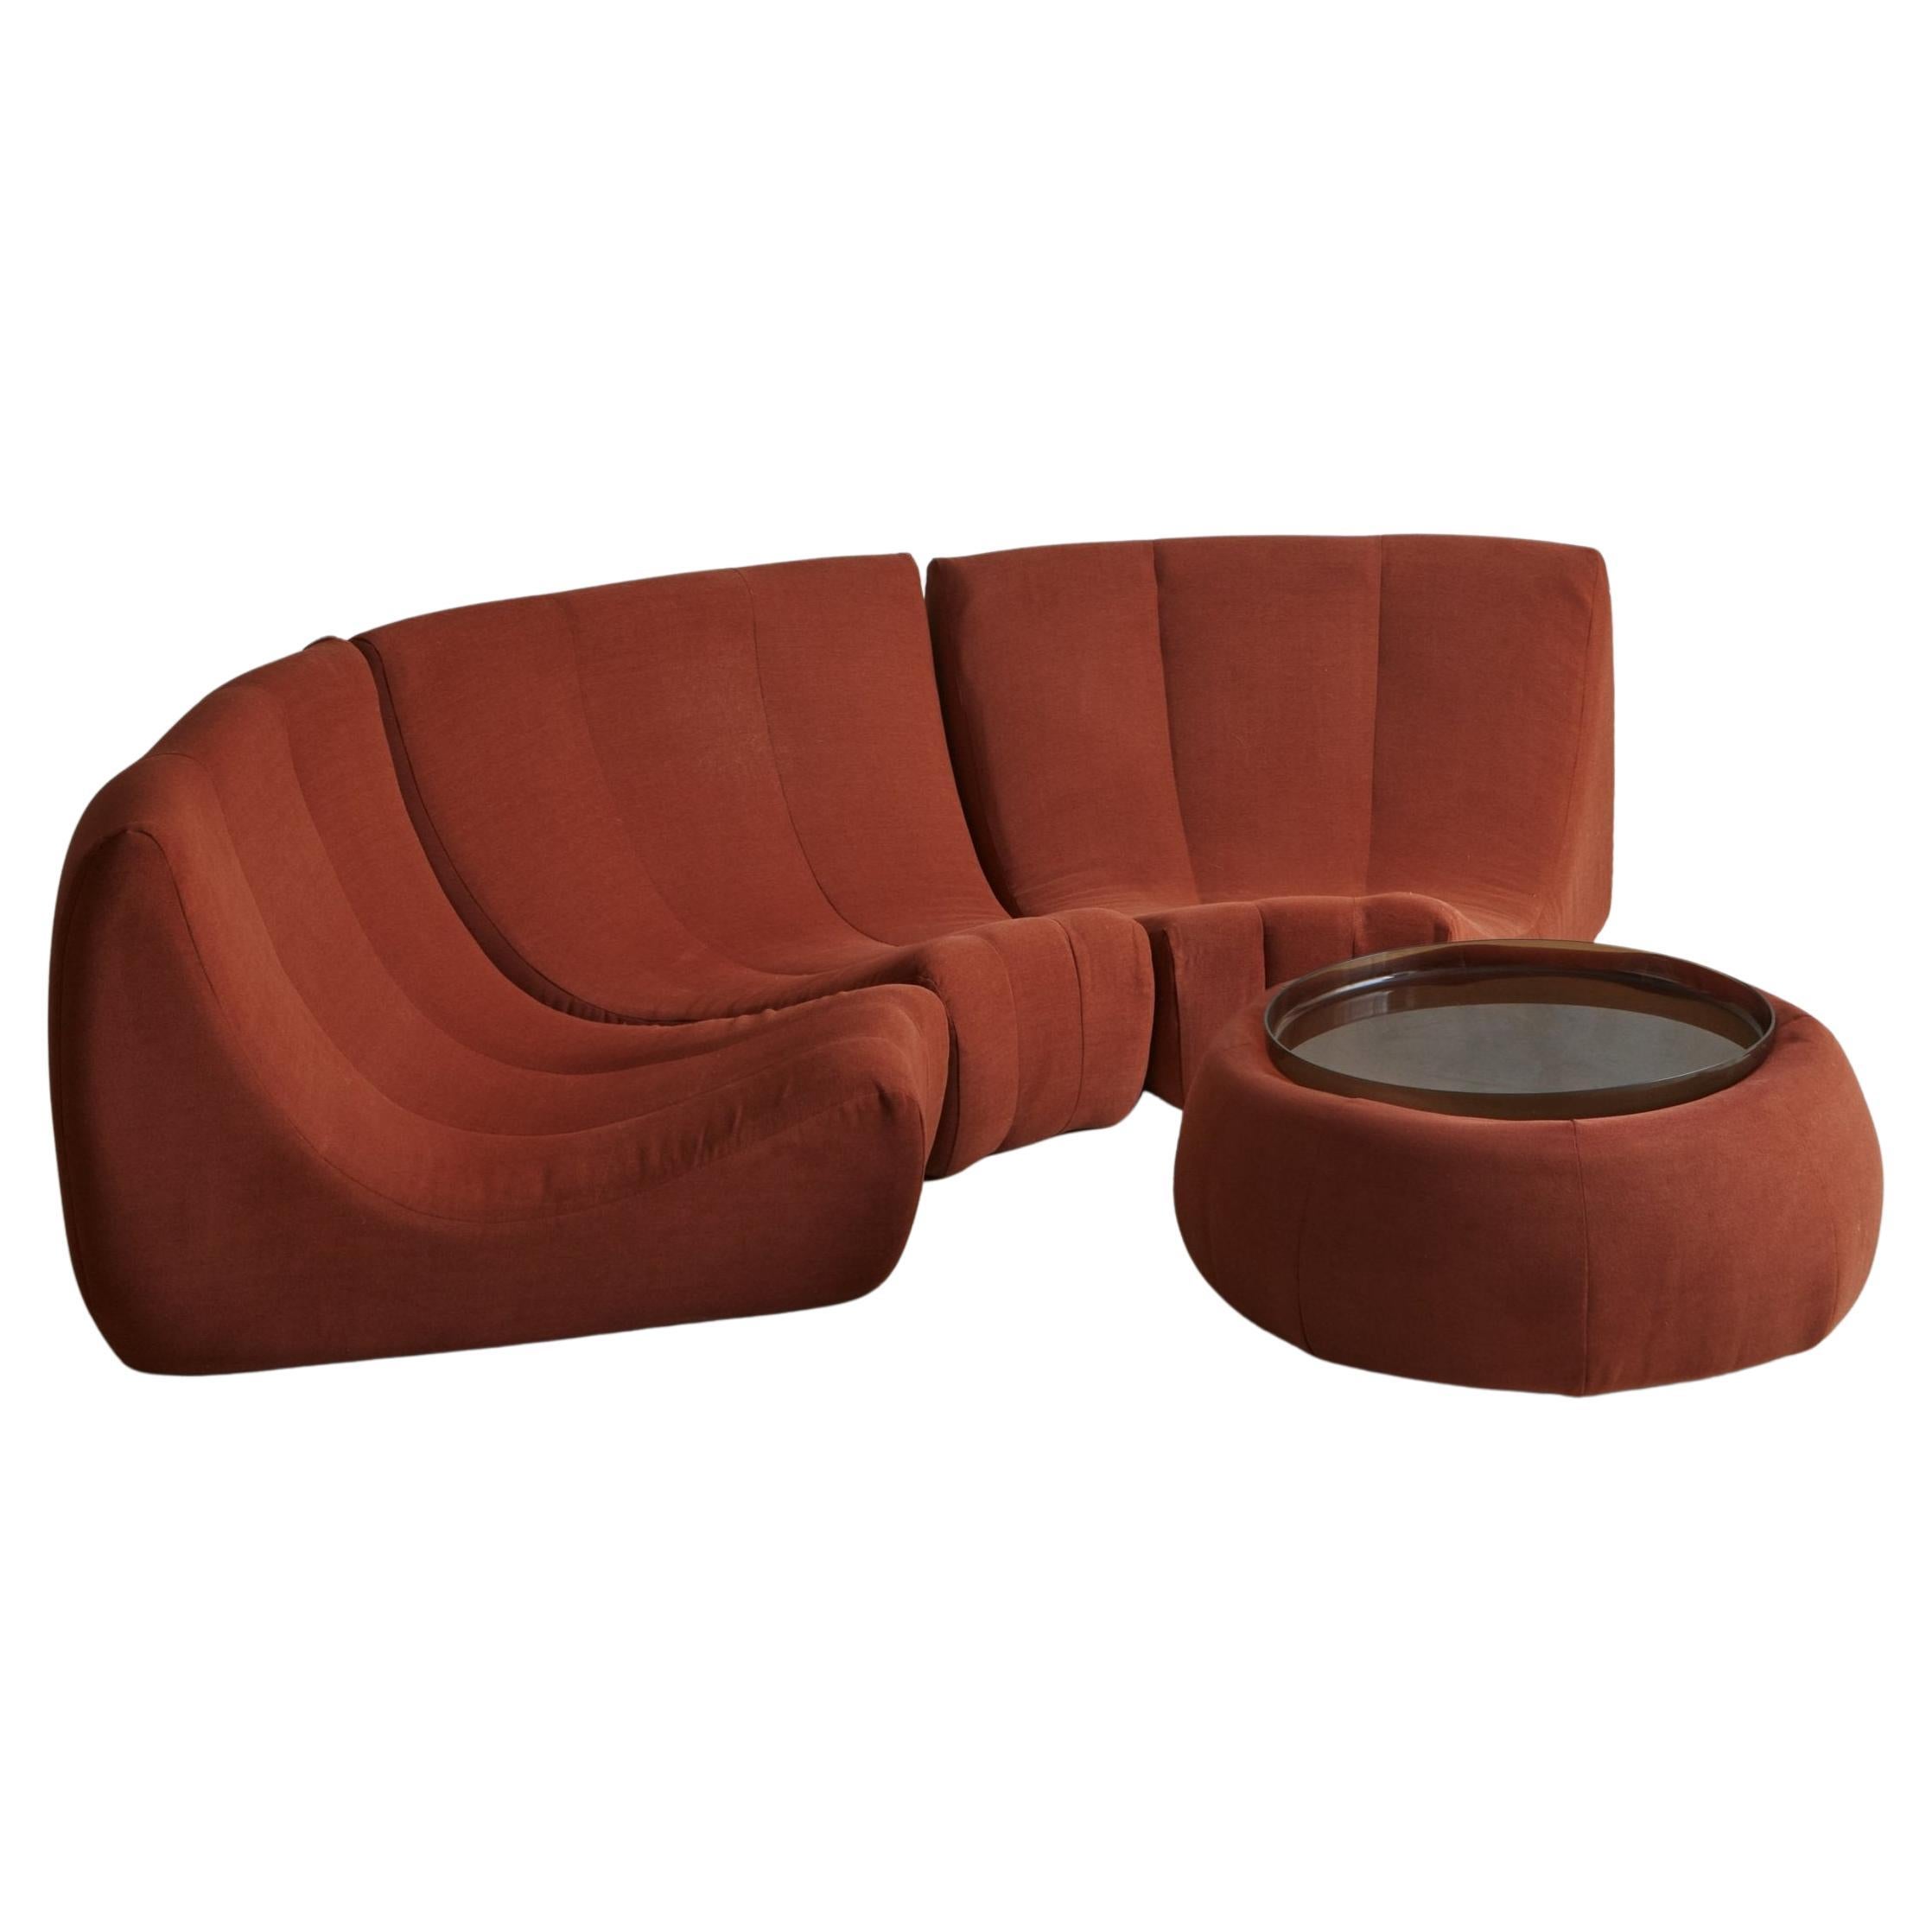 3-Piece 'Gilda' Sofa with Ottoman by Michel Ducaroy for Ligne Roset, France 1972 For Sale